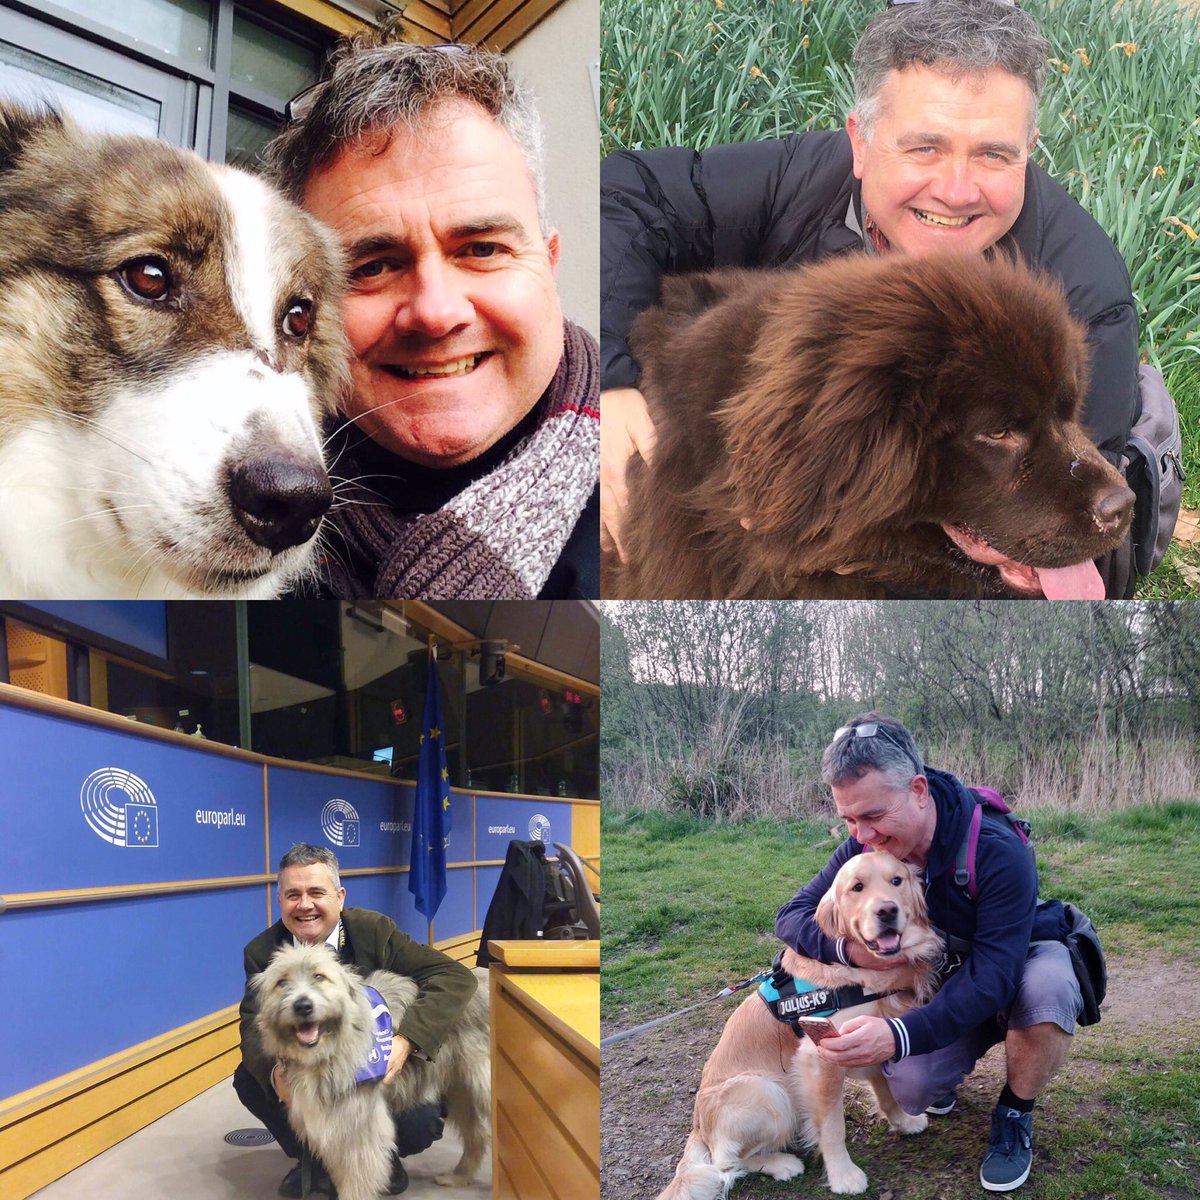 I talk to the founder of @wunderdog_mag about why I think all Parliamentary Candidates should get behind a dog welfare manifesto at next election. Well worth a listen @scanme_tukslaw @DogsTrust @Battersea_ @RSPCA_official @LibDems 

shows.acast.com/the-dog-manife…